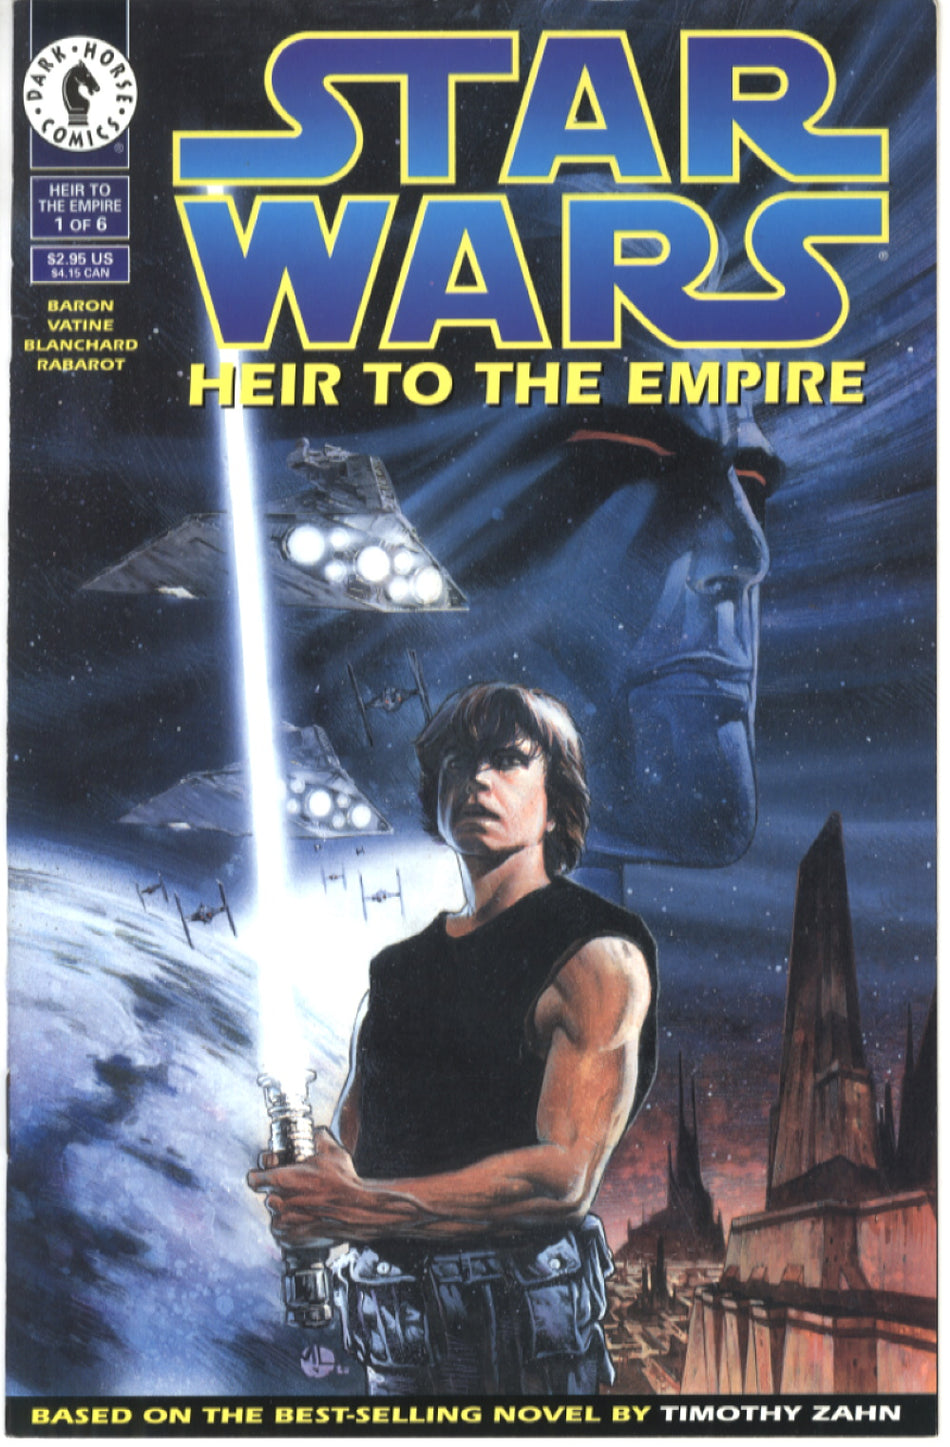 STAR WARS: HEIR TO THE EMPIRE 001 NM- (9.2)